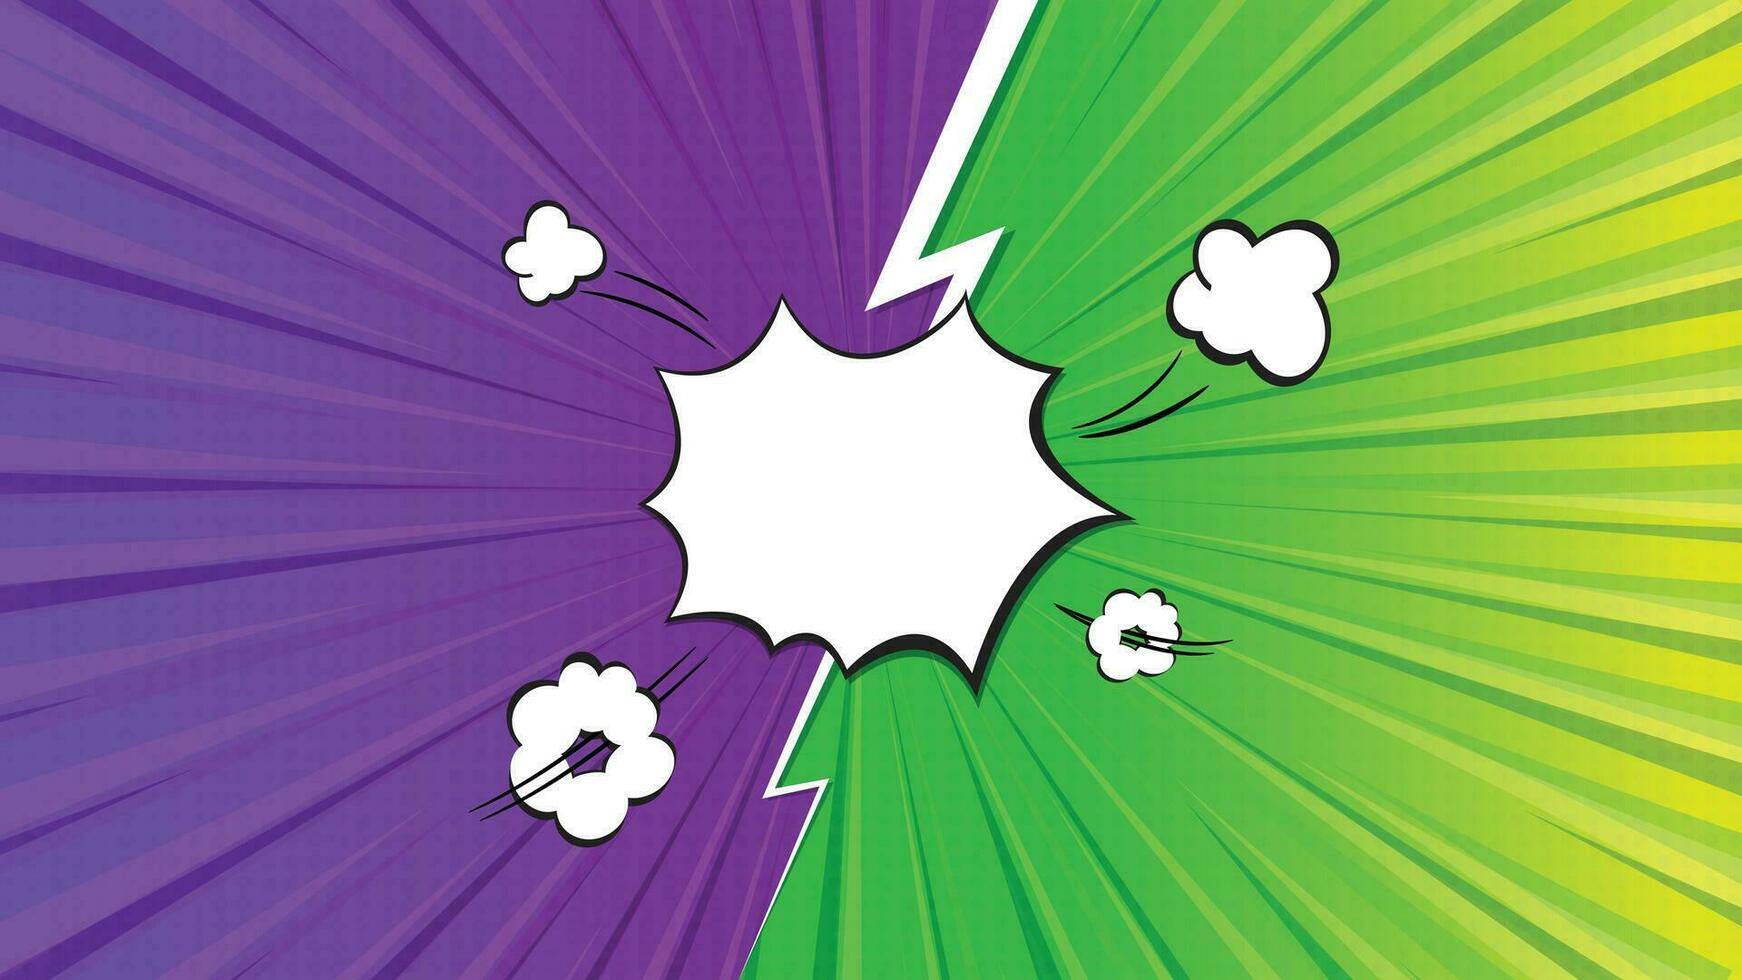 Versus VS Comics Style Background Vertical Template. Purple and green, Comic book style background, Classic pop-art style, superhero battle intro, gradient background - 16.9 aspect ratio vector